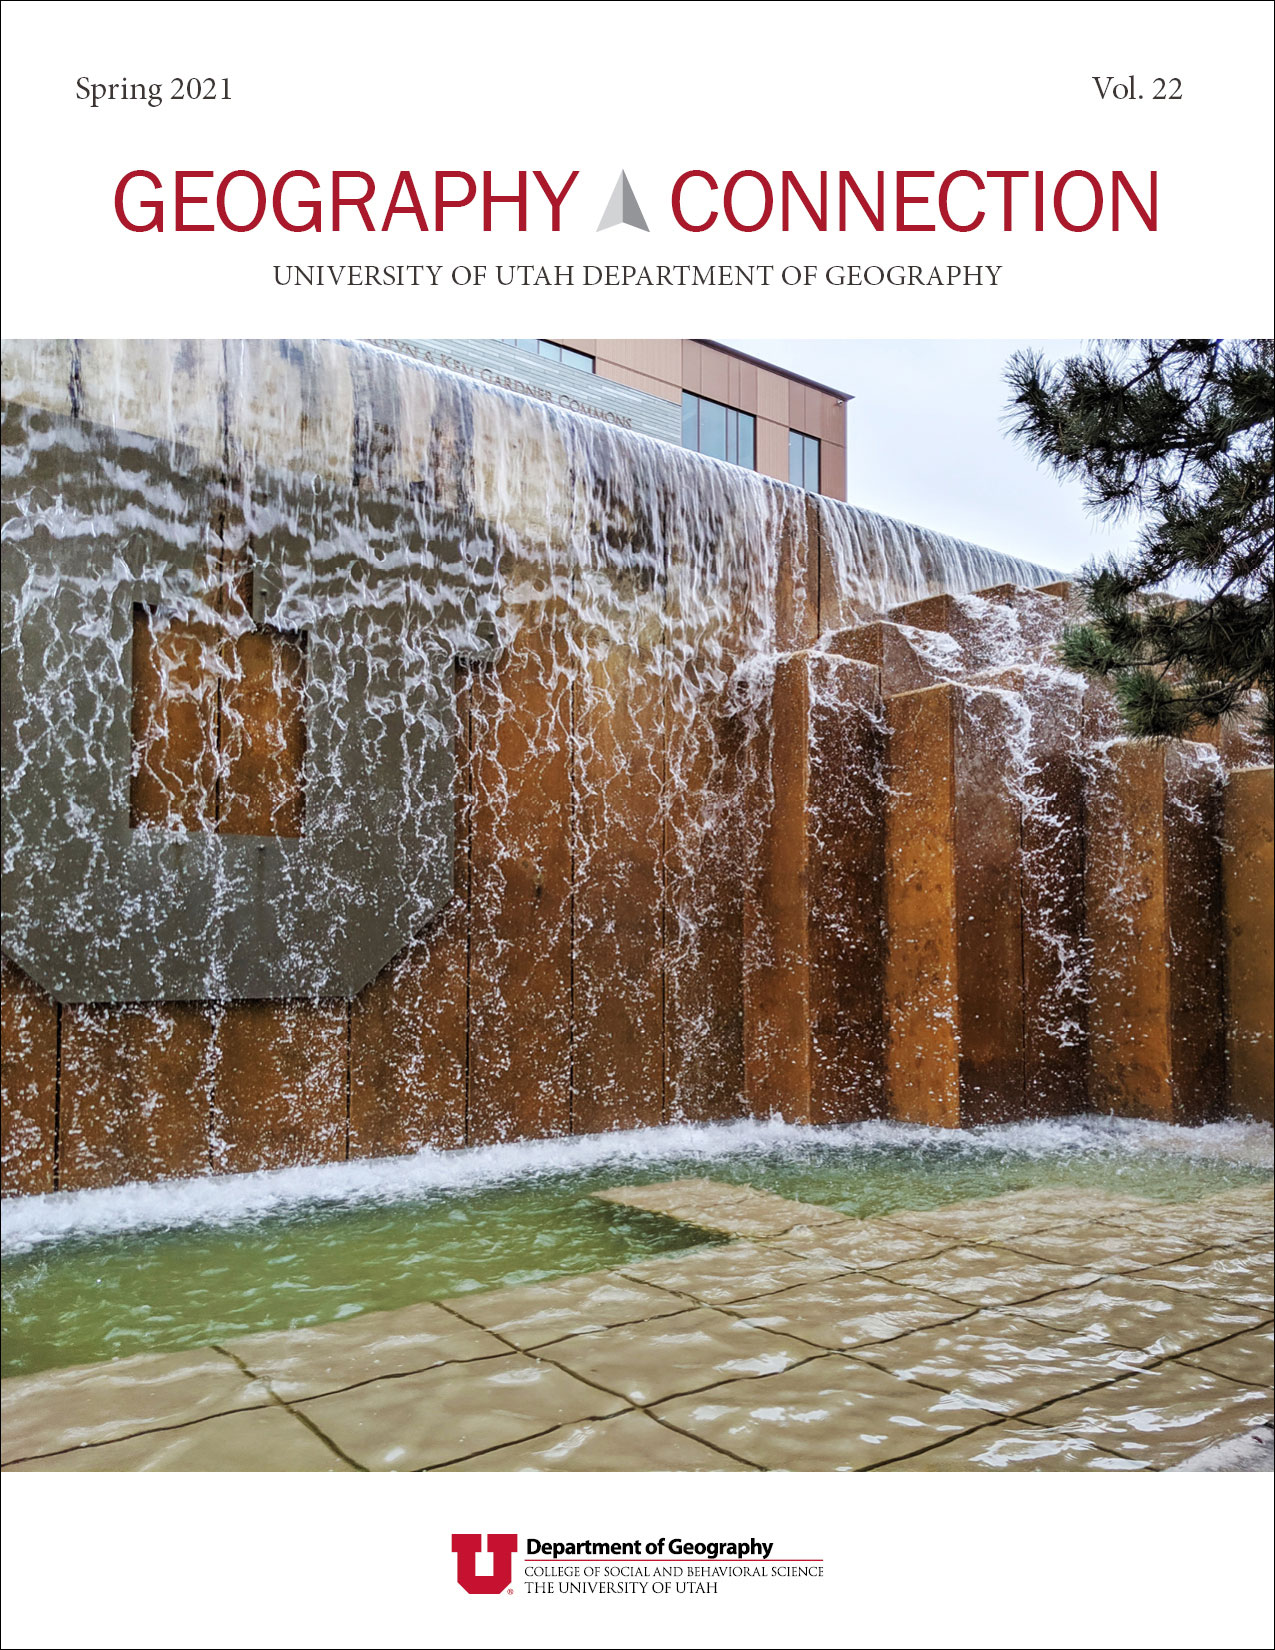 Geography Connection Spring 2021